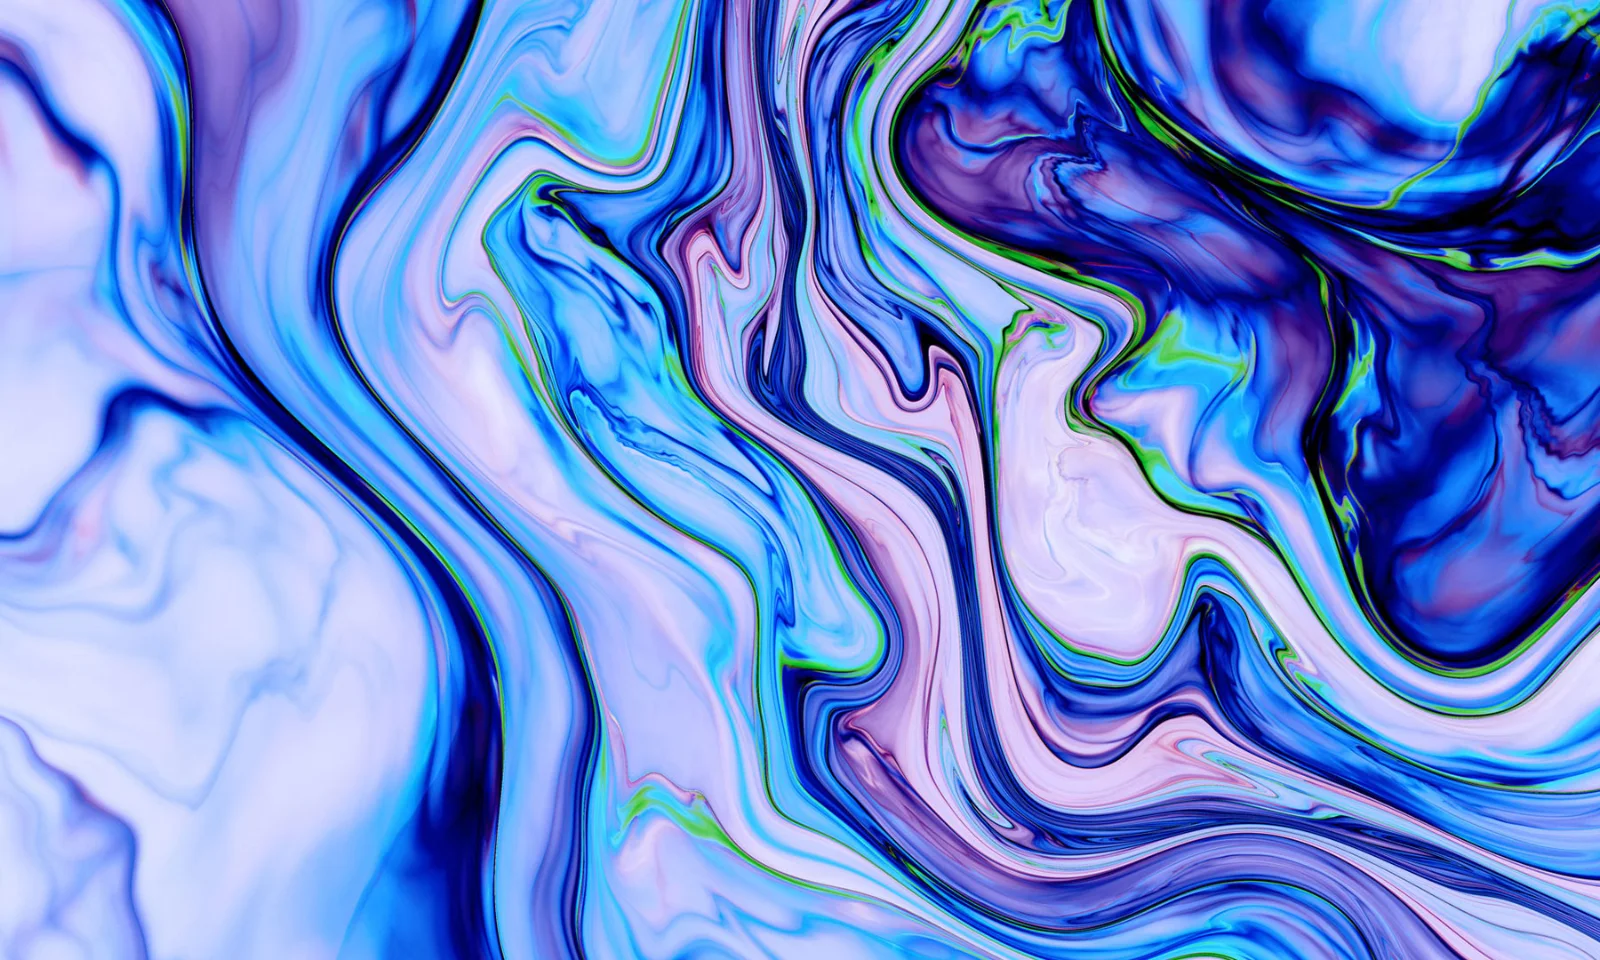 Discover our design services through this striking key visual featuring an abstract fluid pattern with vibrant swirls of blue, purple, and pink. This image encapsulates the creativity, innovation, and dynamic approach we bring to every design project, ensuring unique and effective solutions for our clients.